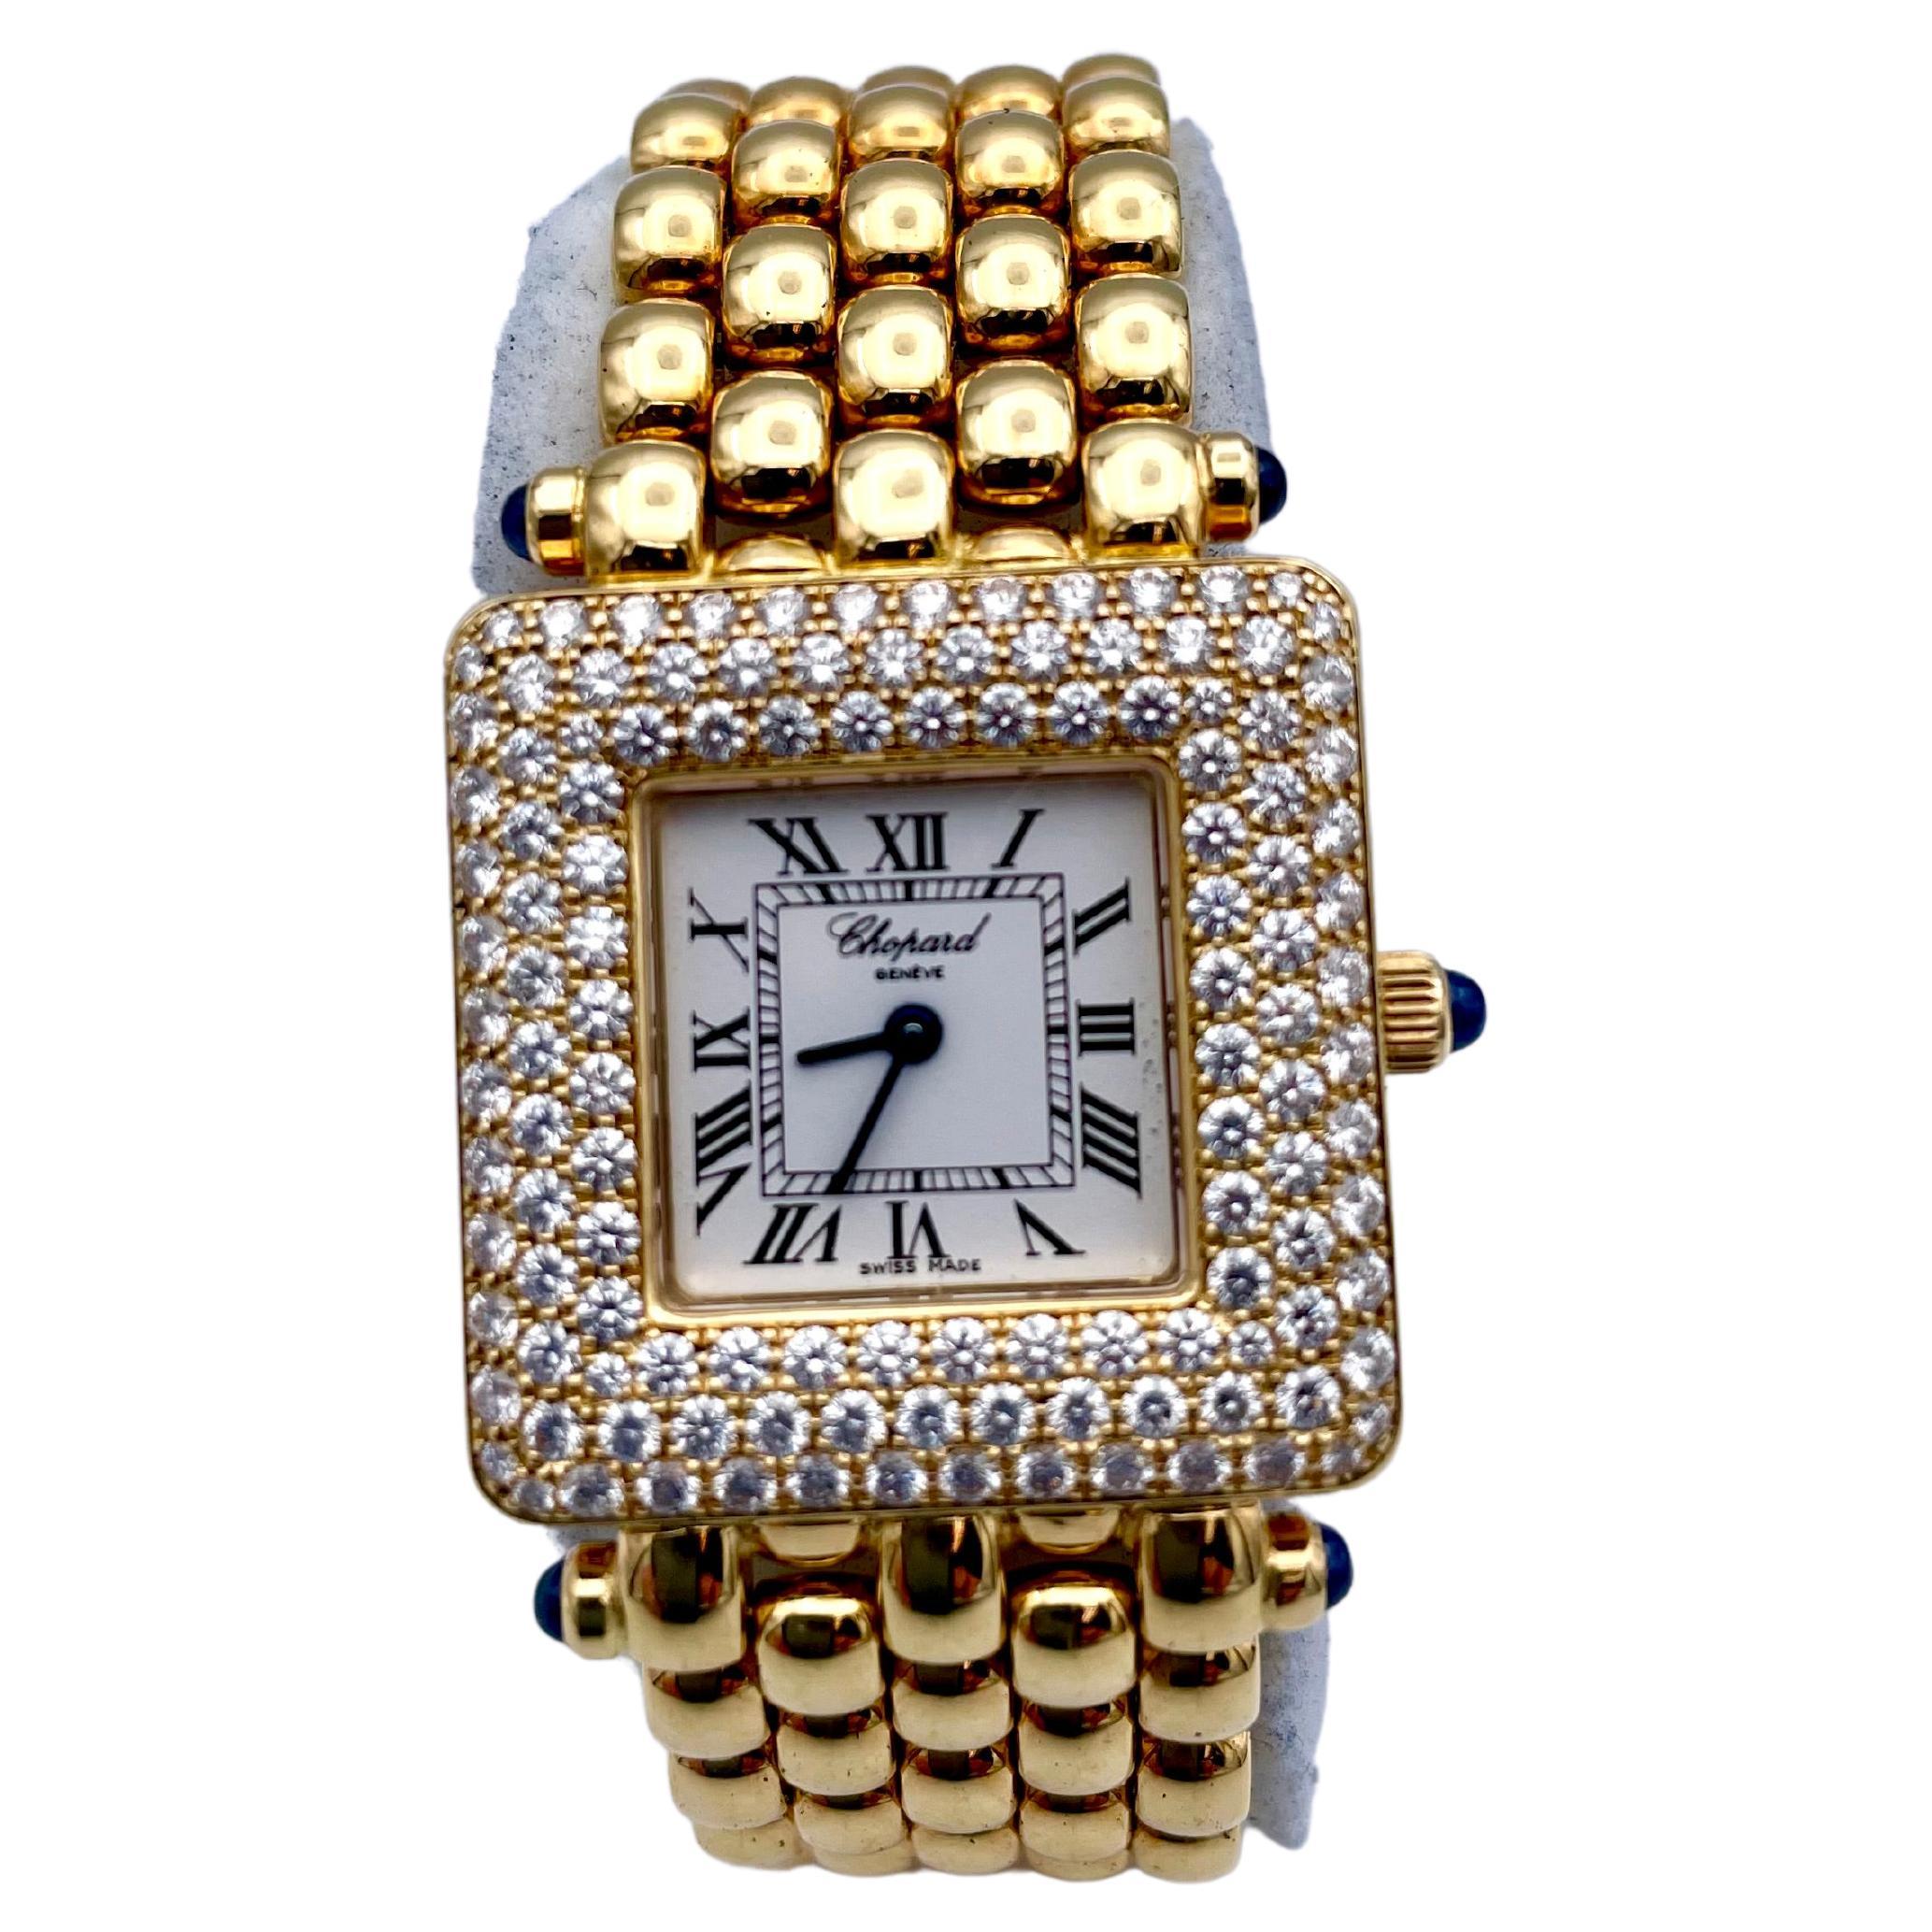 Big and beautiful square diamond watch. Made and signed by CHOPARD.  18K yellow gold.  Set with 12 brilliant full-cut diamonds weighing 2.05 cts.   Case size is 26mm.  Band size is 17mm.  Set with four cabochon sapphires. Cabochon sapphire crown. 